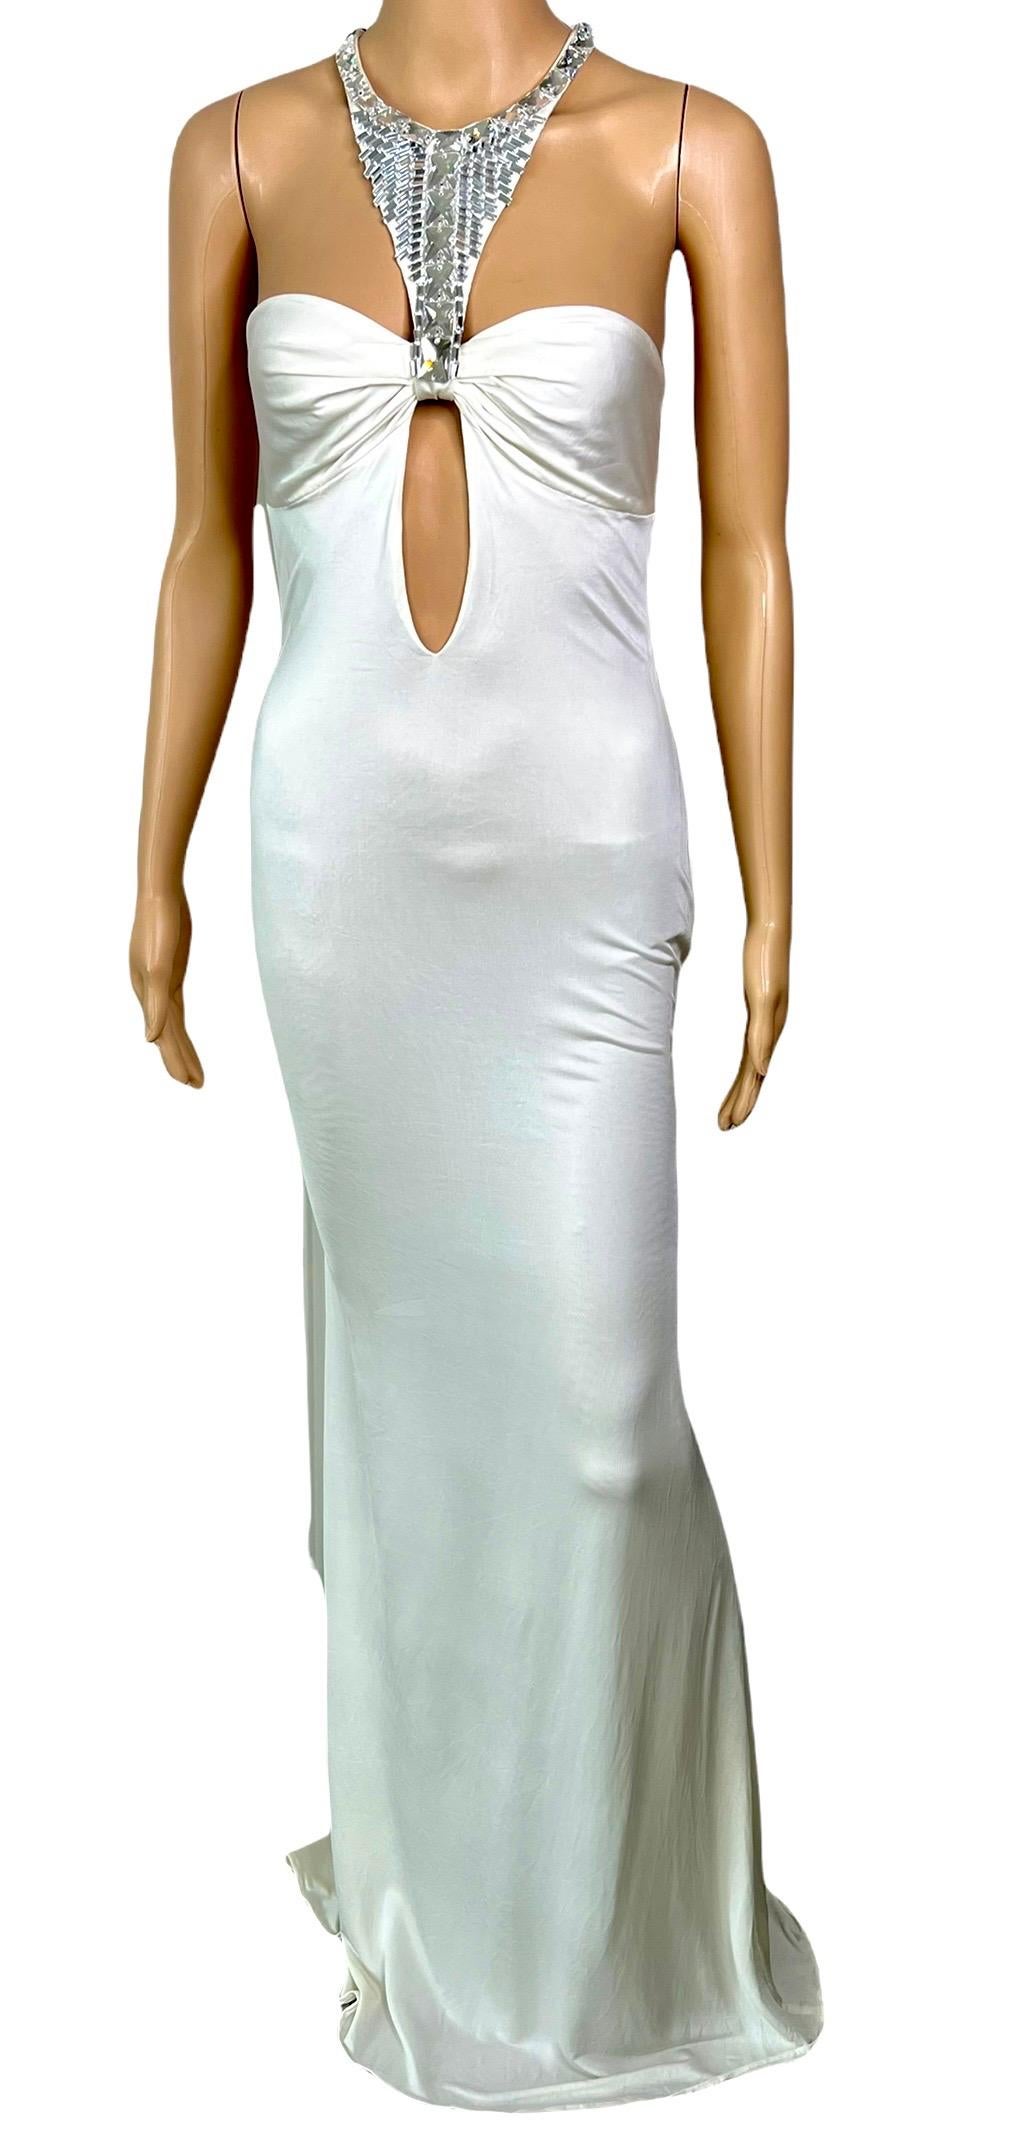 Tom Ford for Gucci F/W 2004 Embellished Plunging Cutout Ivory Evening Dress Gown For Sale 13